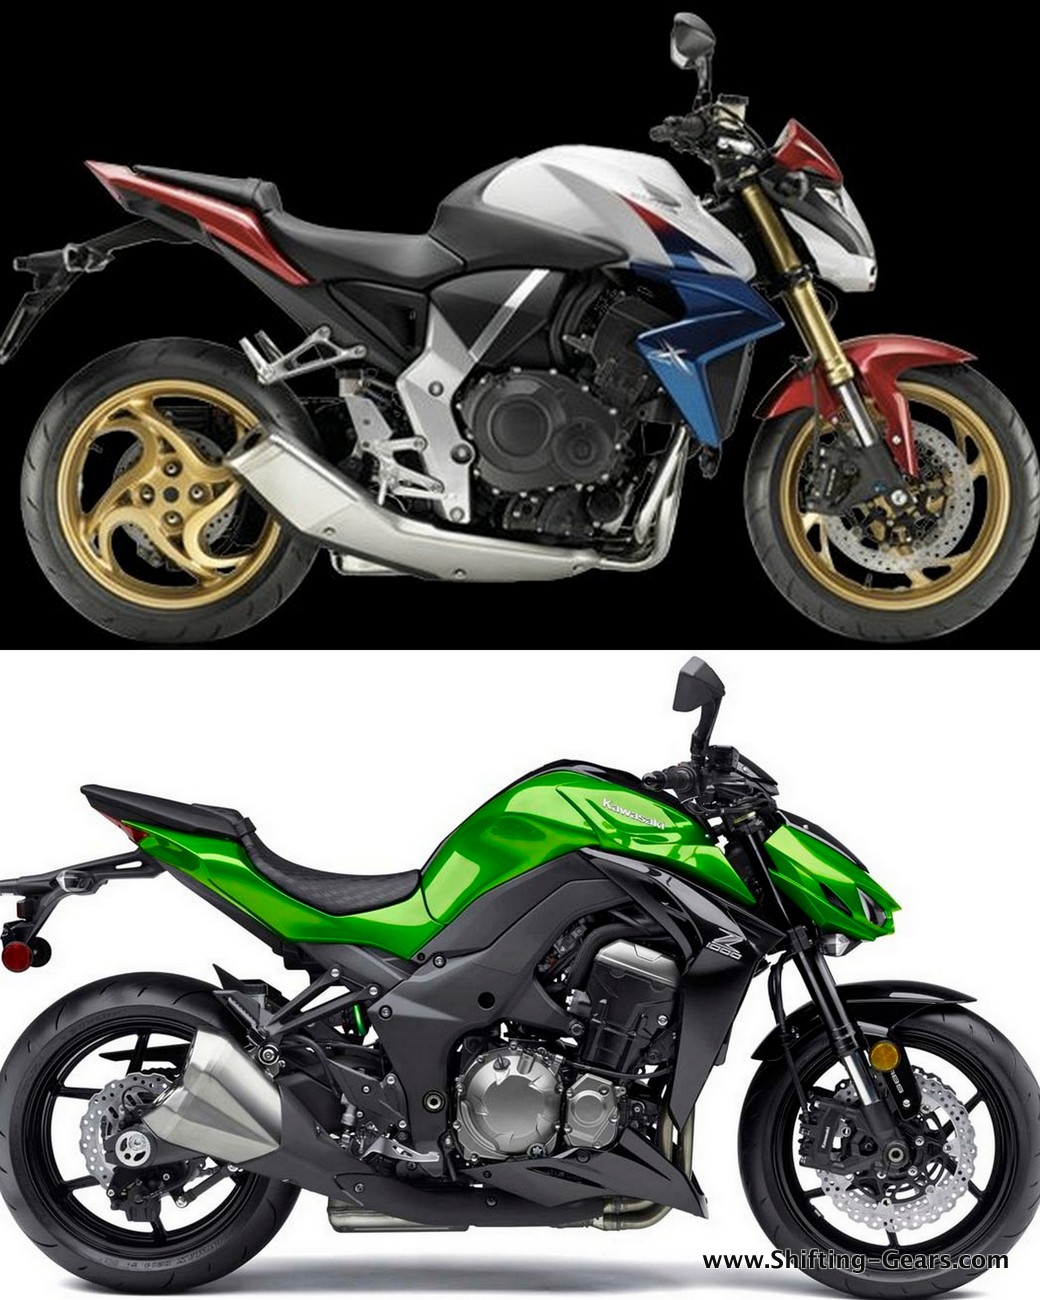 The Kawasaki Z1000 is a recent product, but the Honda CB1000R holds its ground well